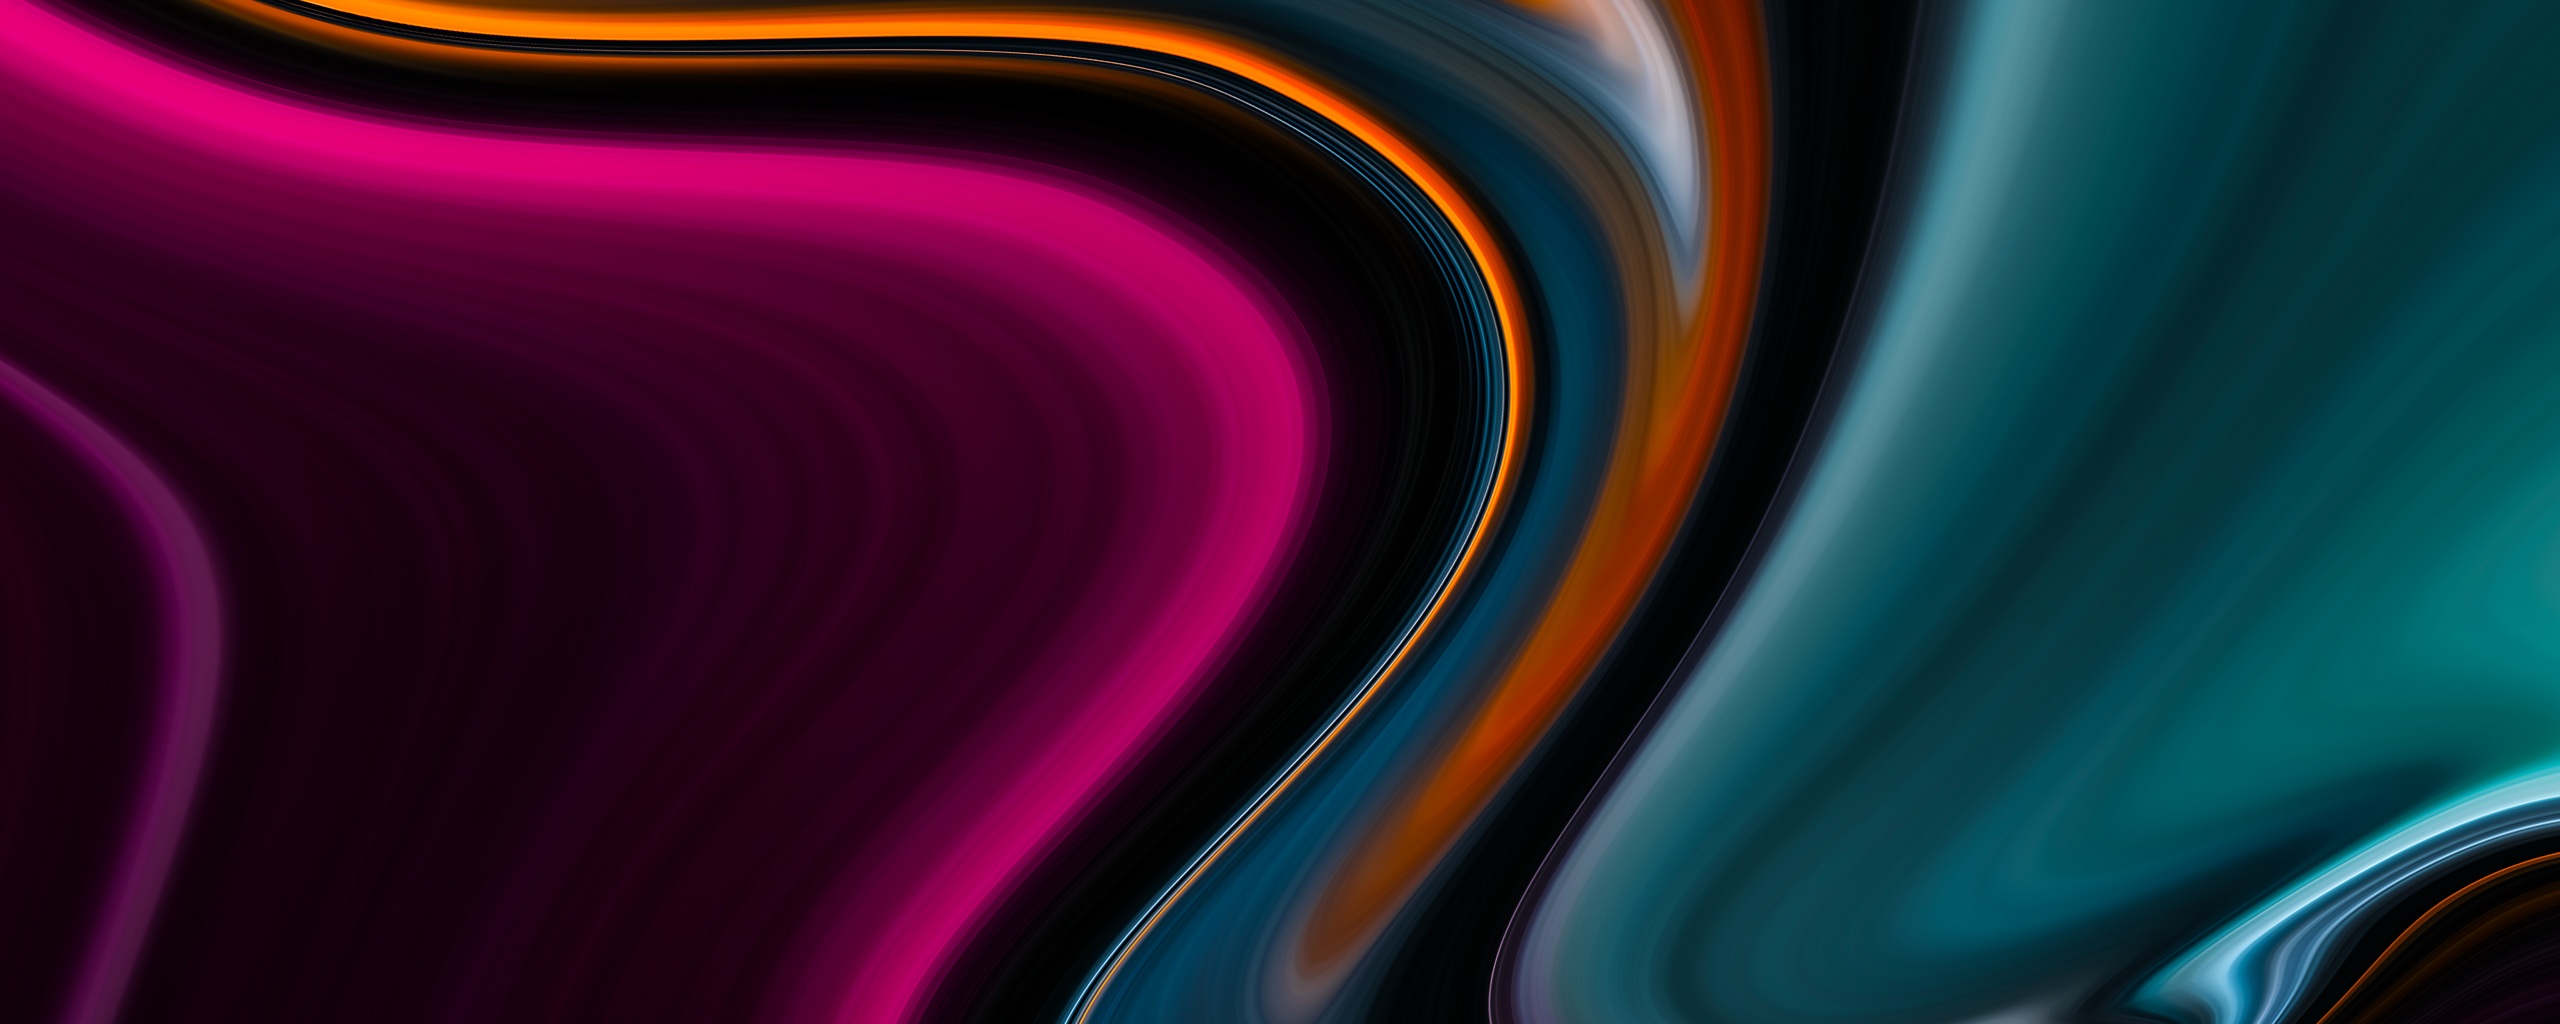 Abstract Color Flow 4k - 4k Wallpapers - 40.000+ ipad wallpapers 4k ...